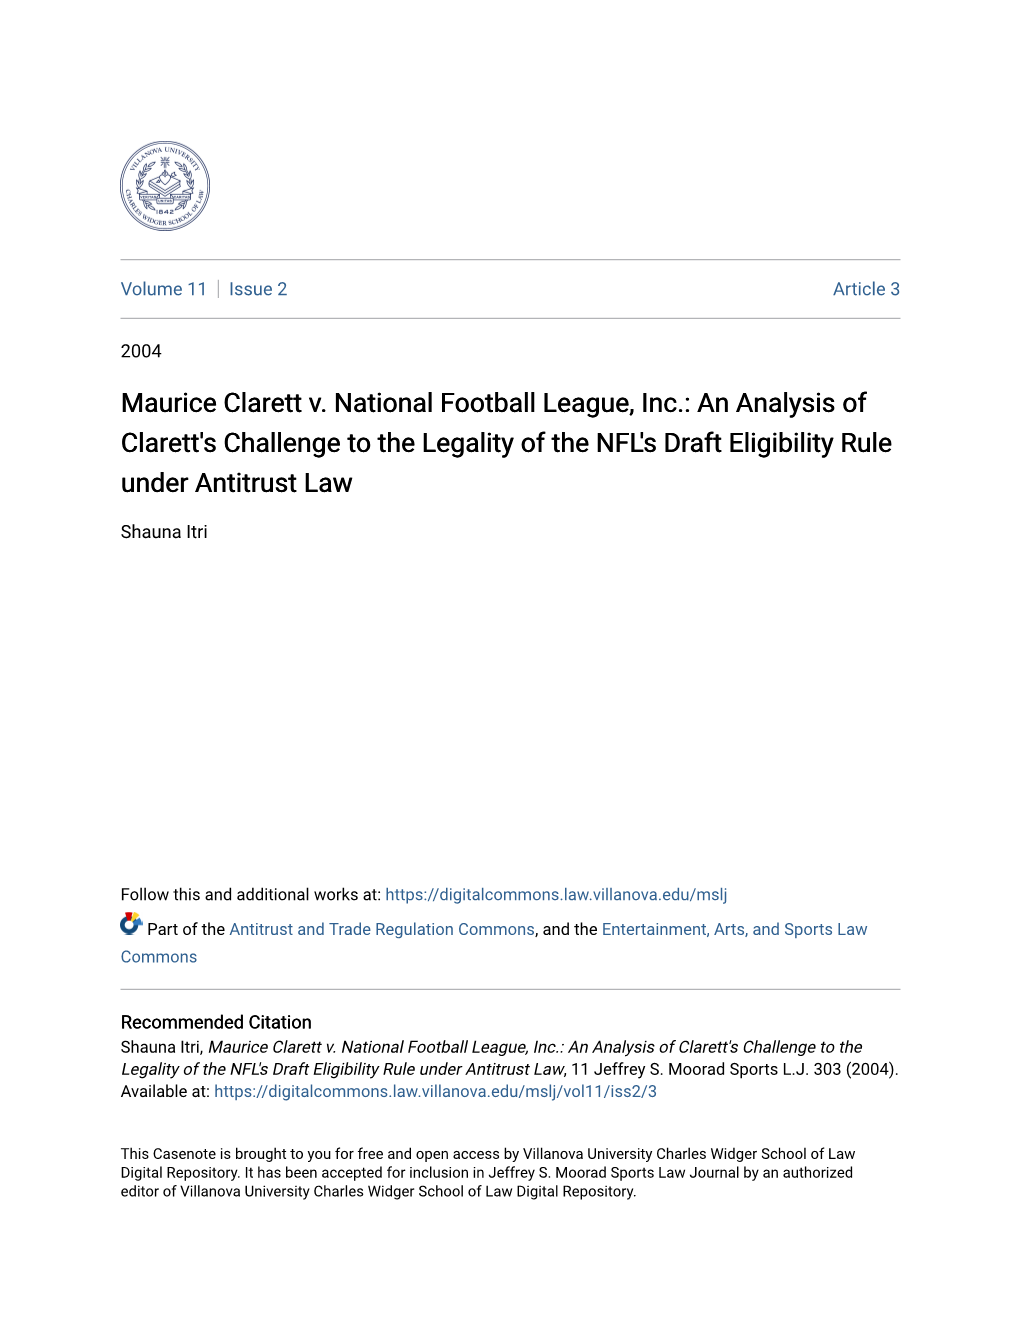 Maurice Clarett V. National Football League, Inc.: an Analysis of Clarett's Challenge to the Legality of the NFL's Draft Eligibility Rule Under Antitrust Law